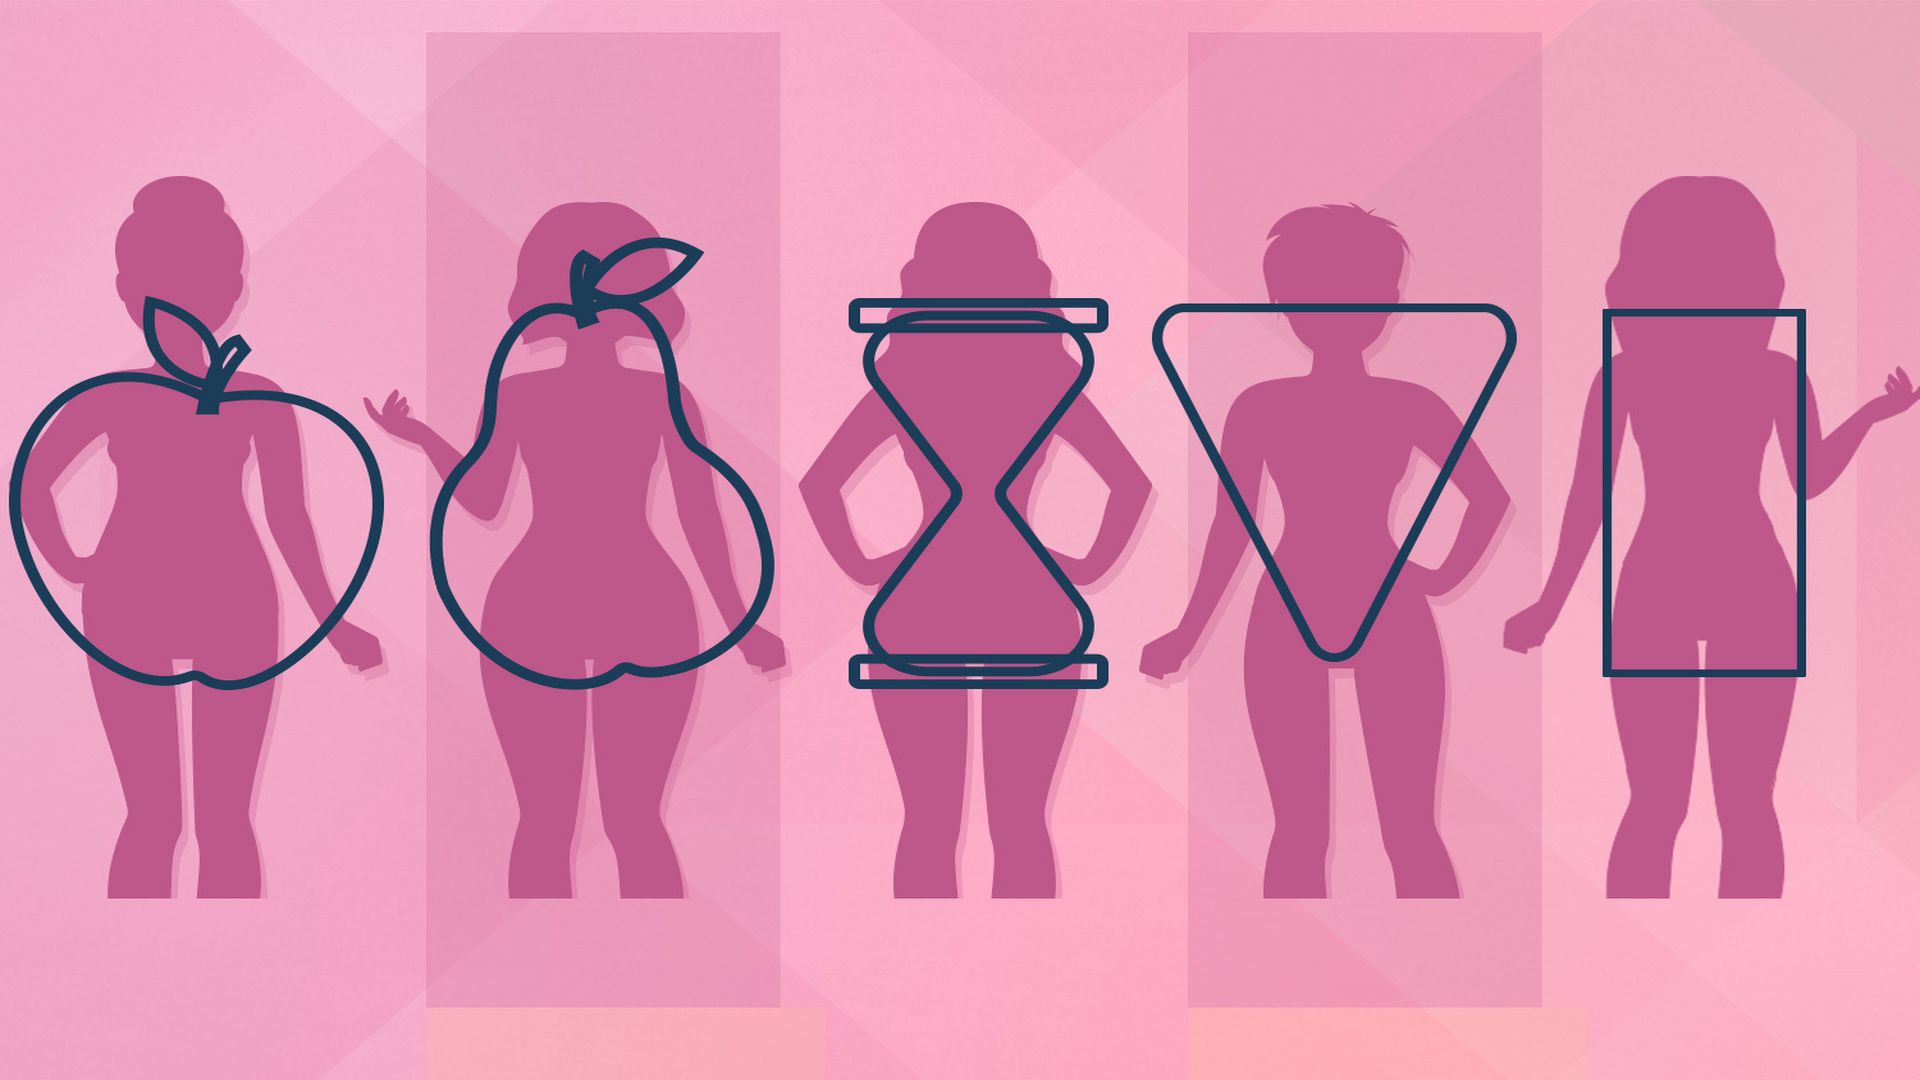 Your body shape is a good indicator of your health.